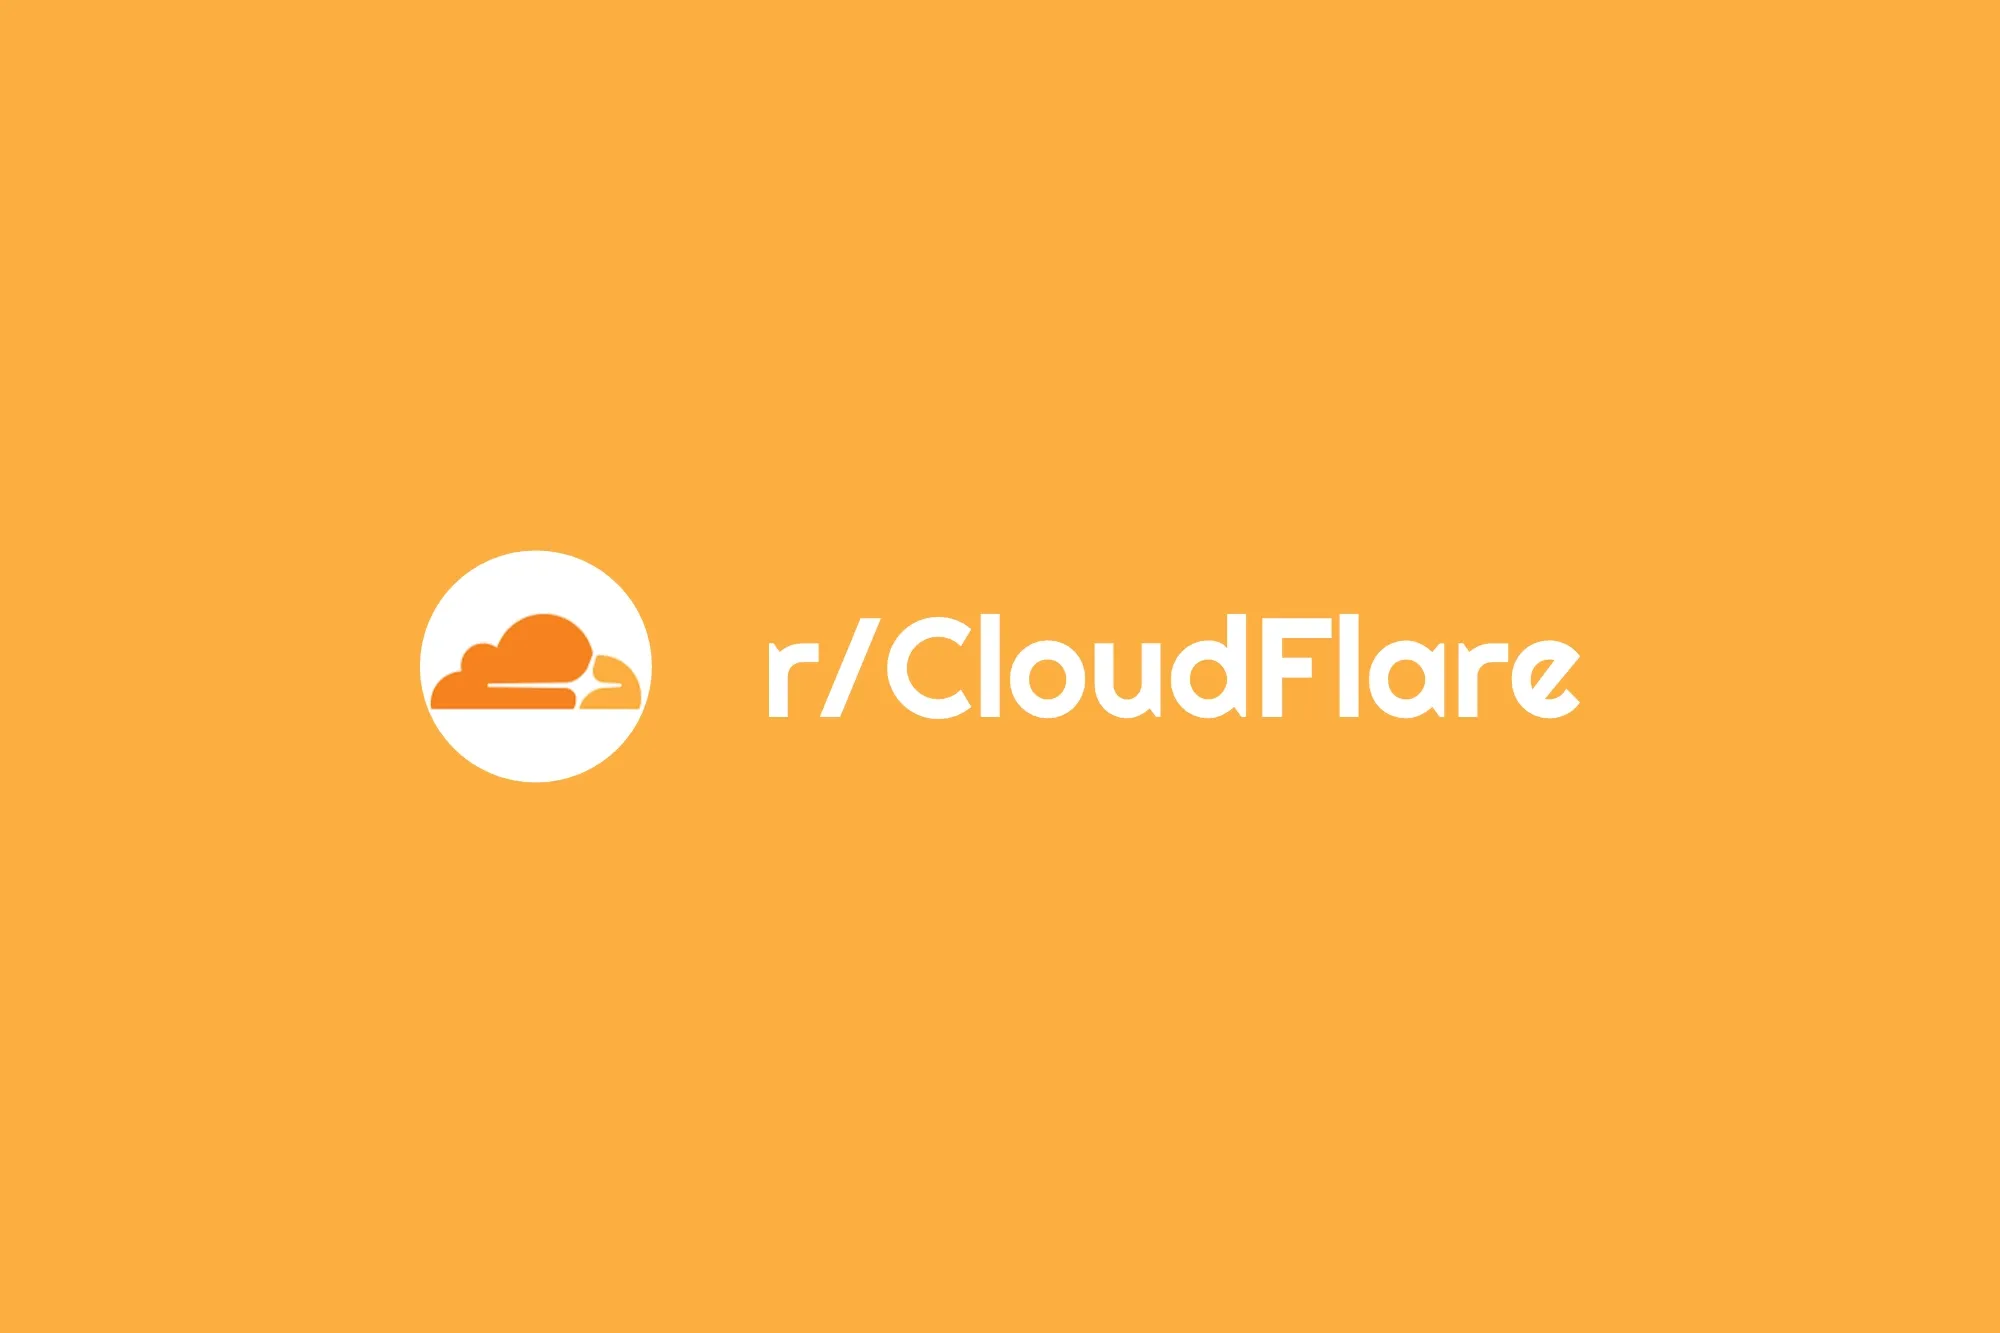 r/CloudFlare: “Connect” my Bluehost domain to Cloudflare dashboard?